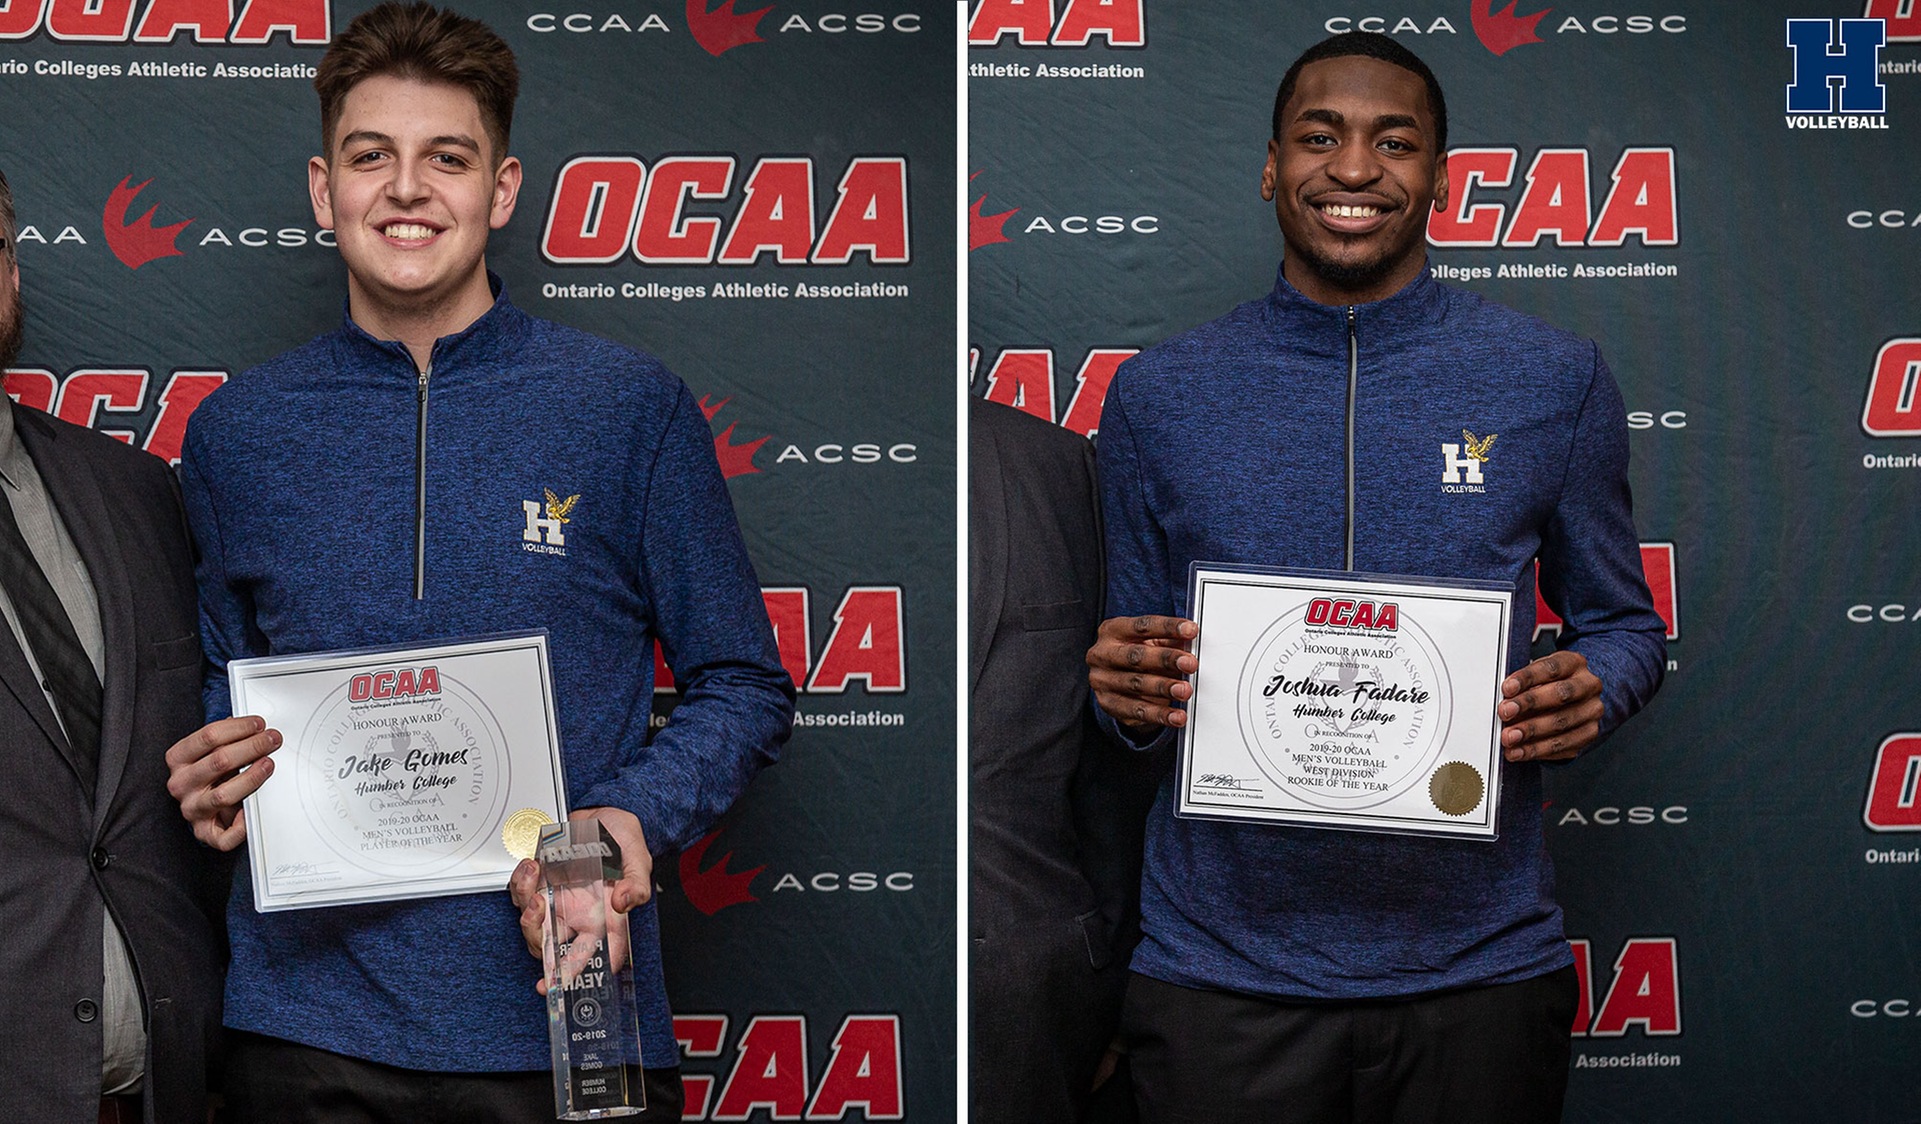 Gomes, Fadare Receive Top Honours at Men’s Volleyball Banquet